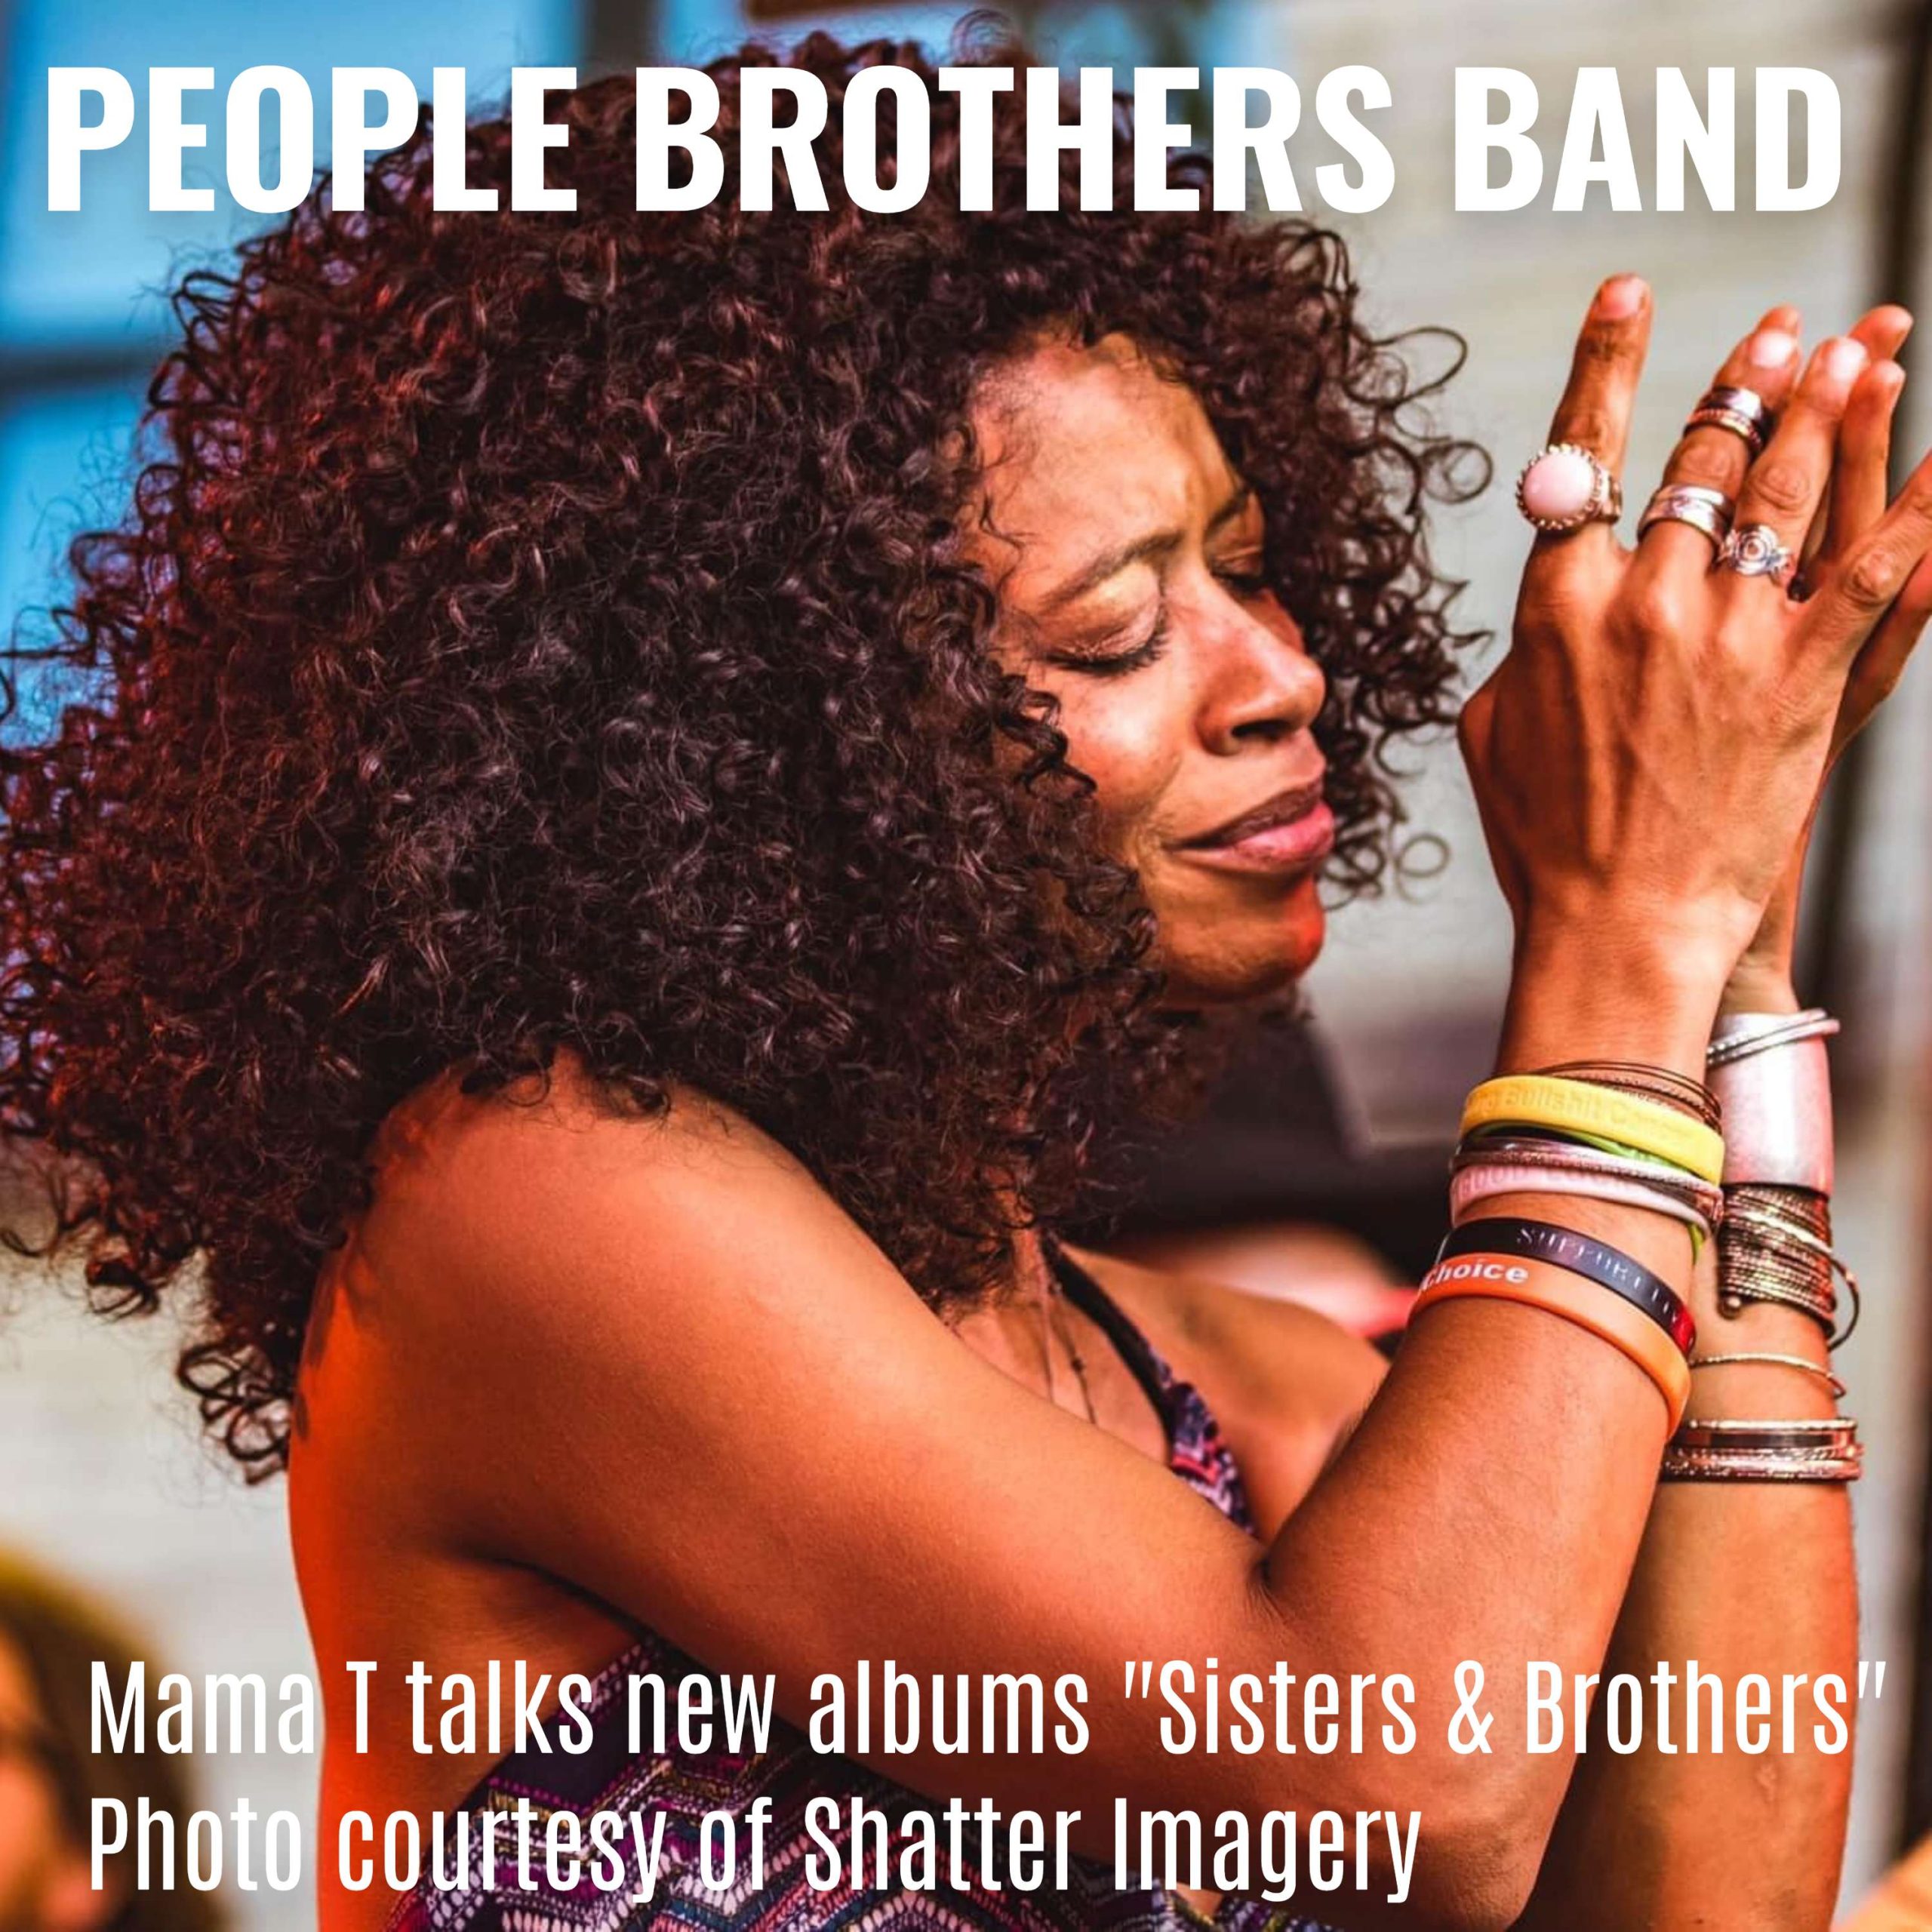 Mama T of People Brothers Band - photo courtesy of shatter Imagery